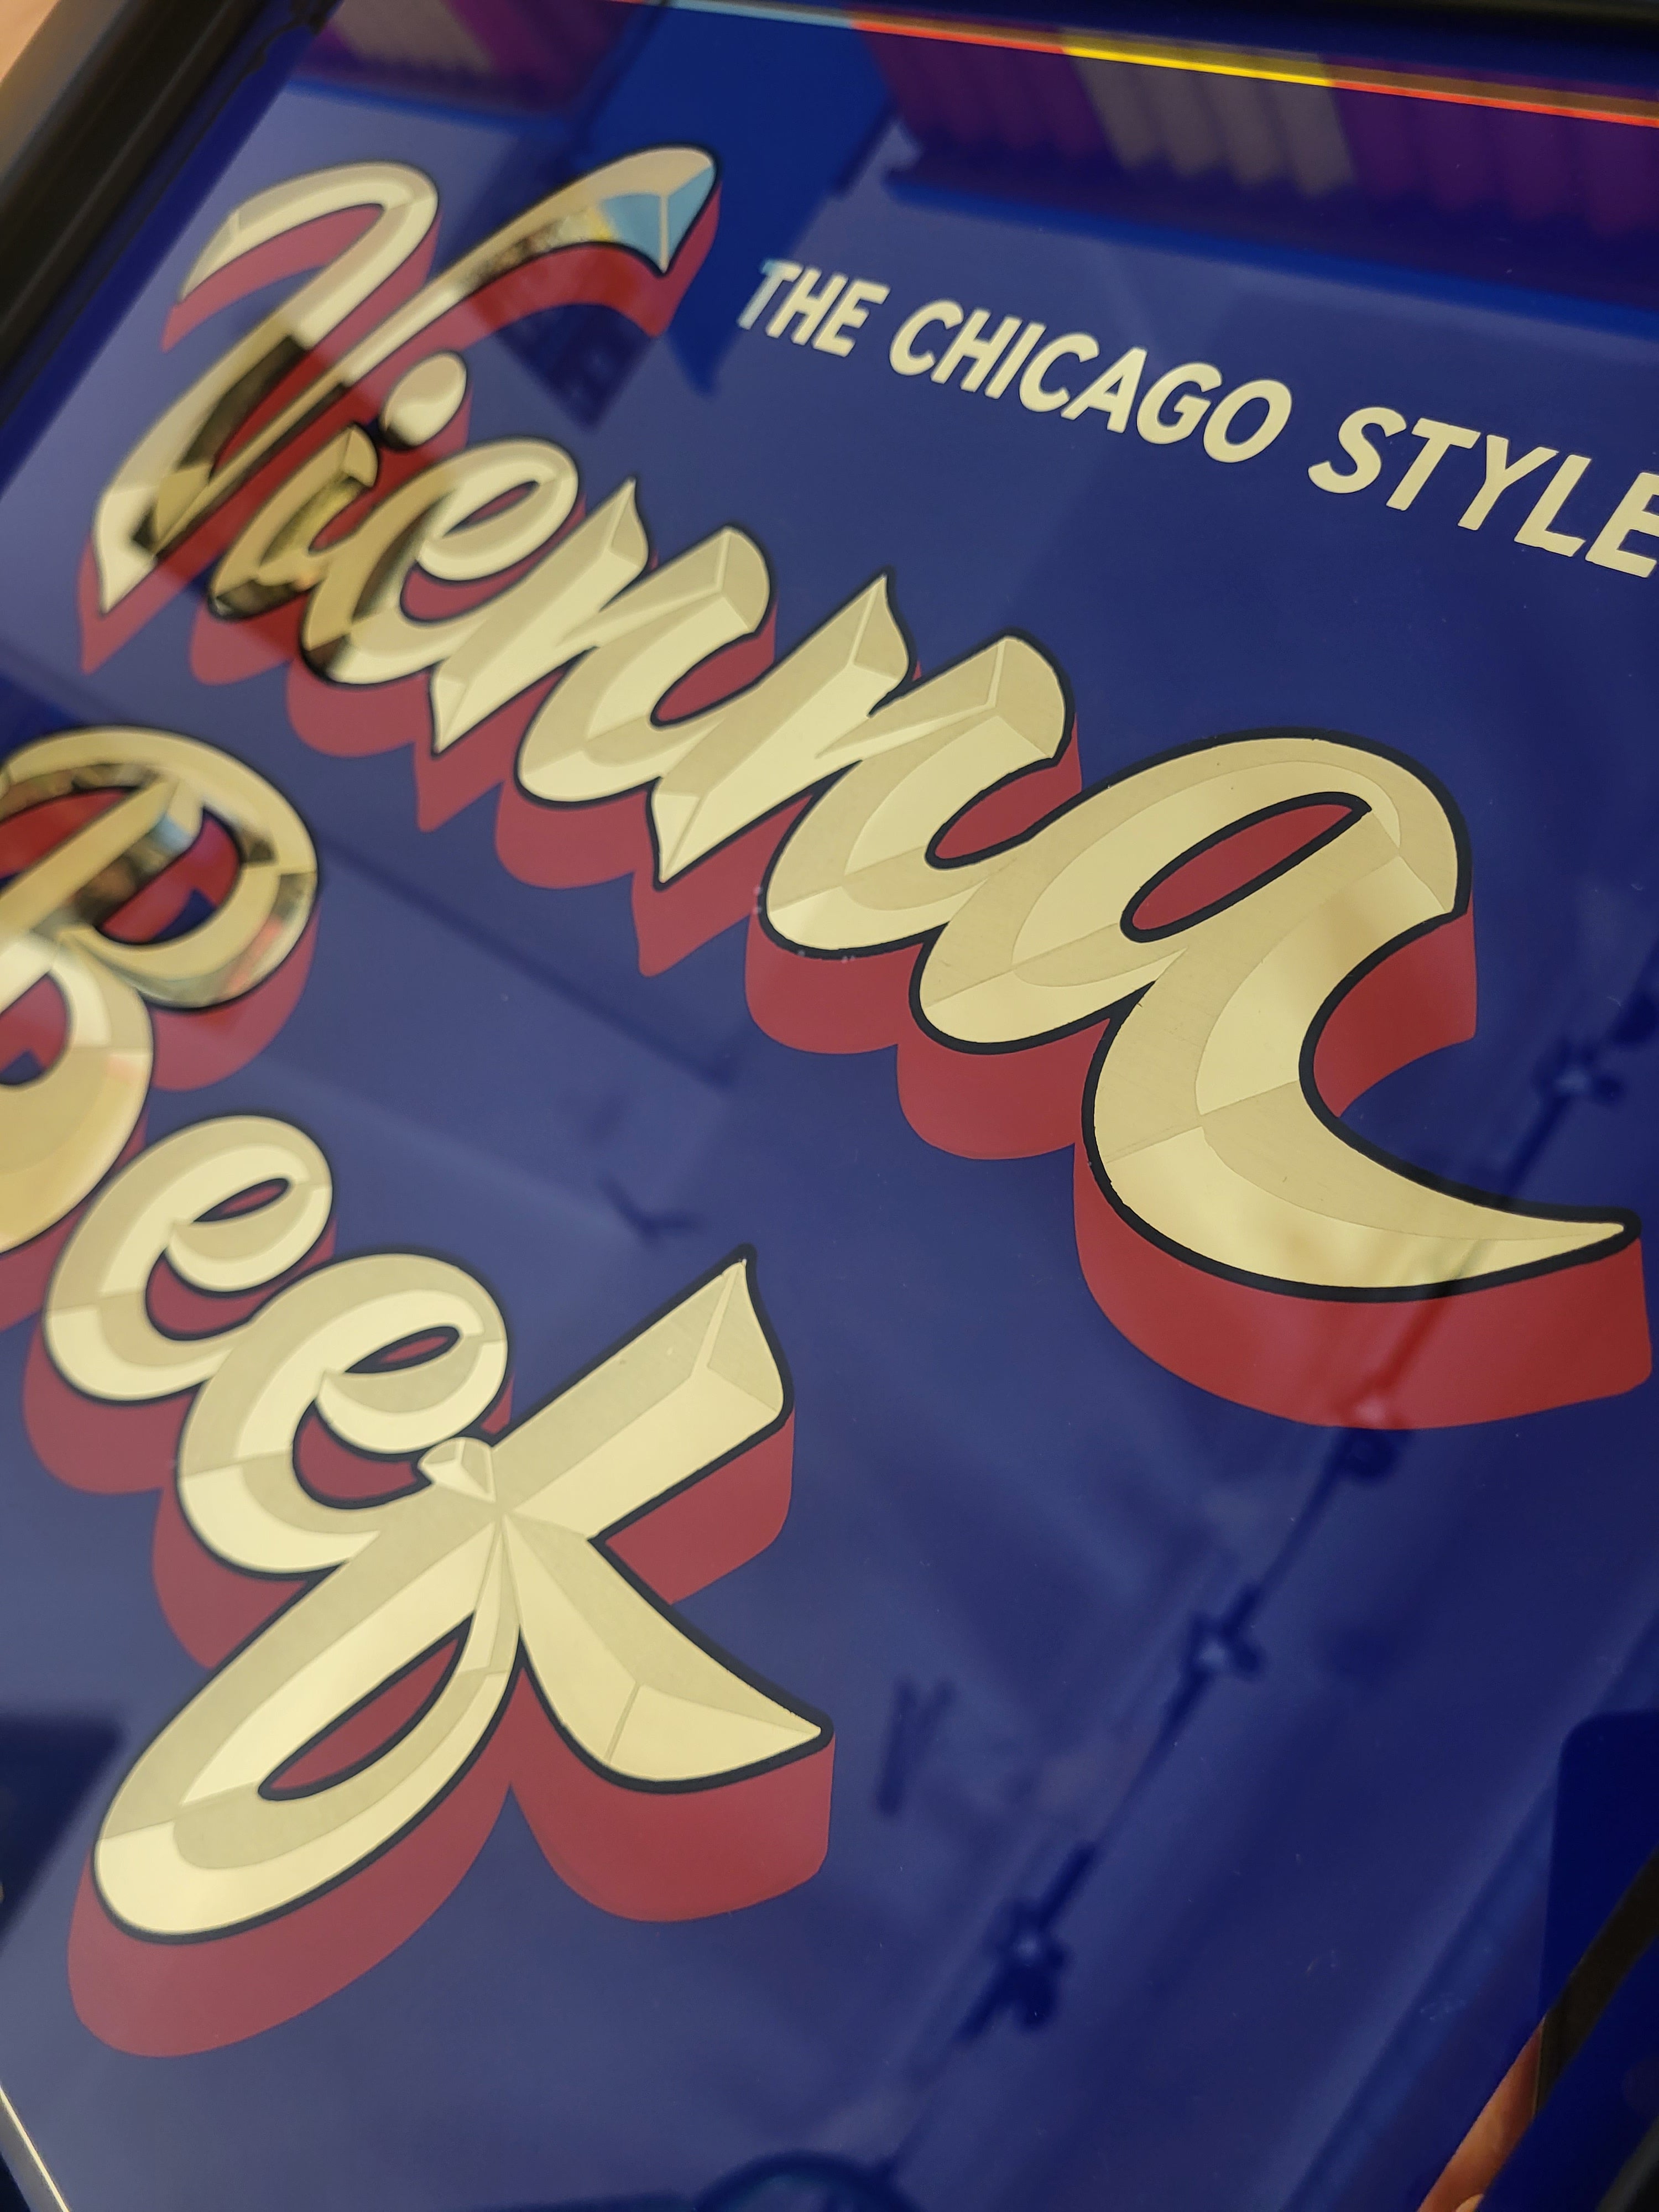 "Chicago Style" by Heart and Bone Signs